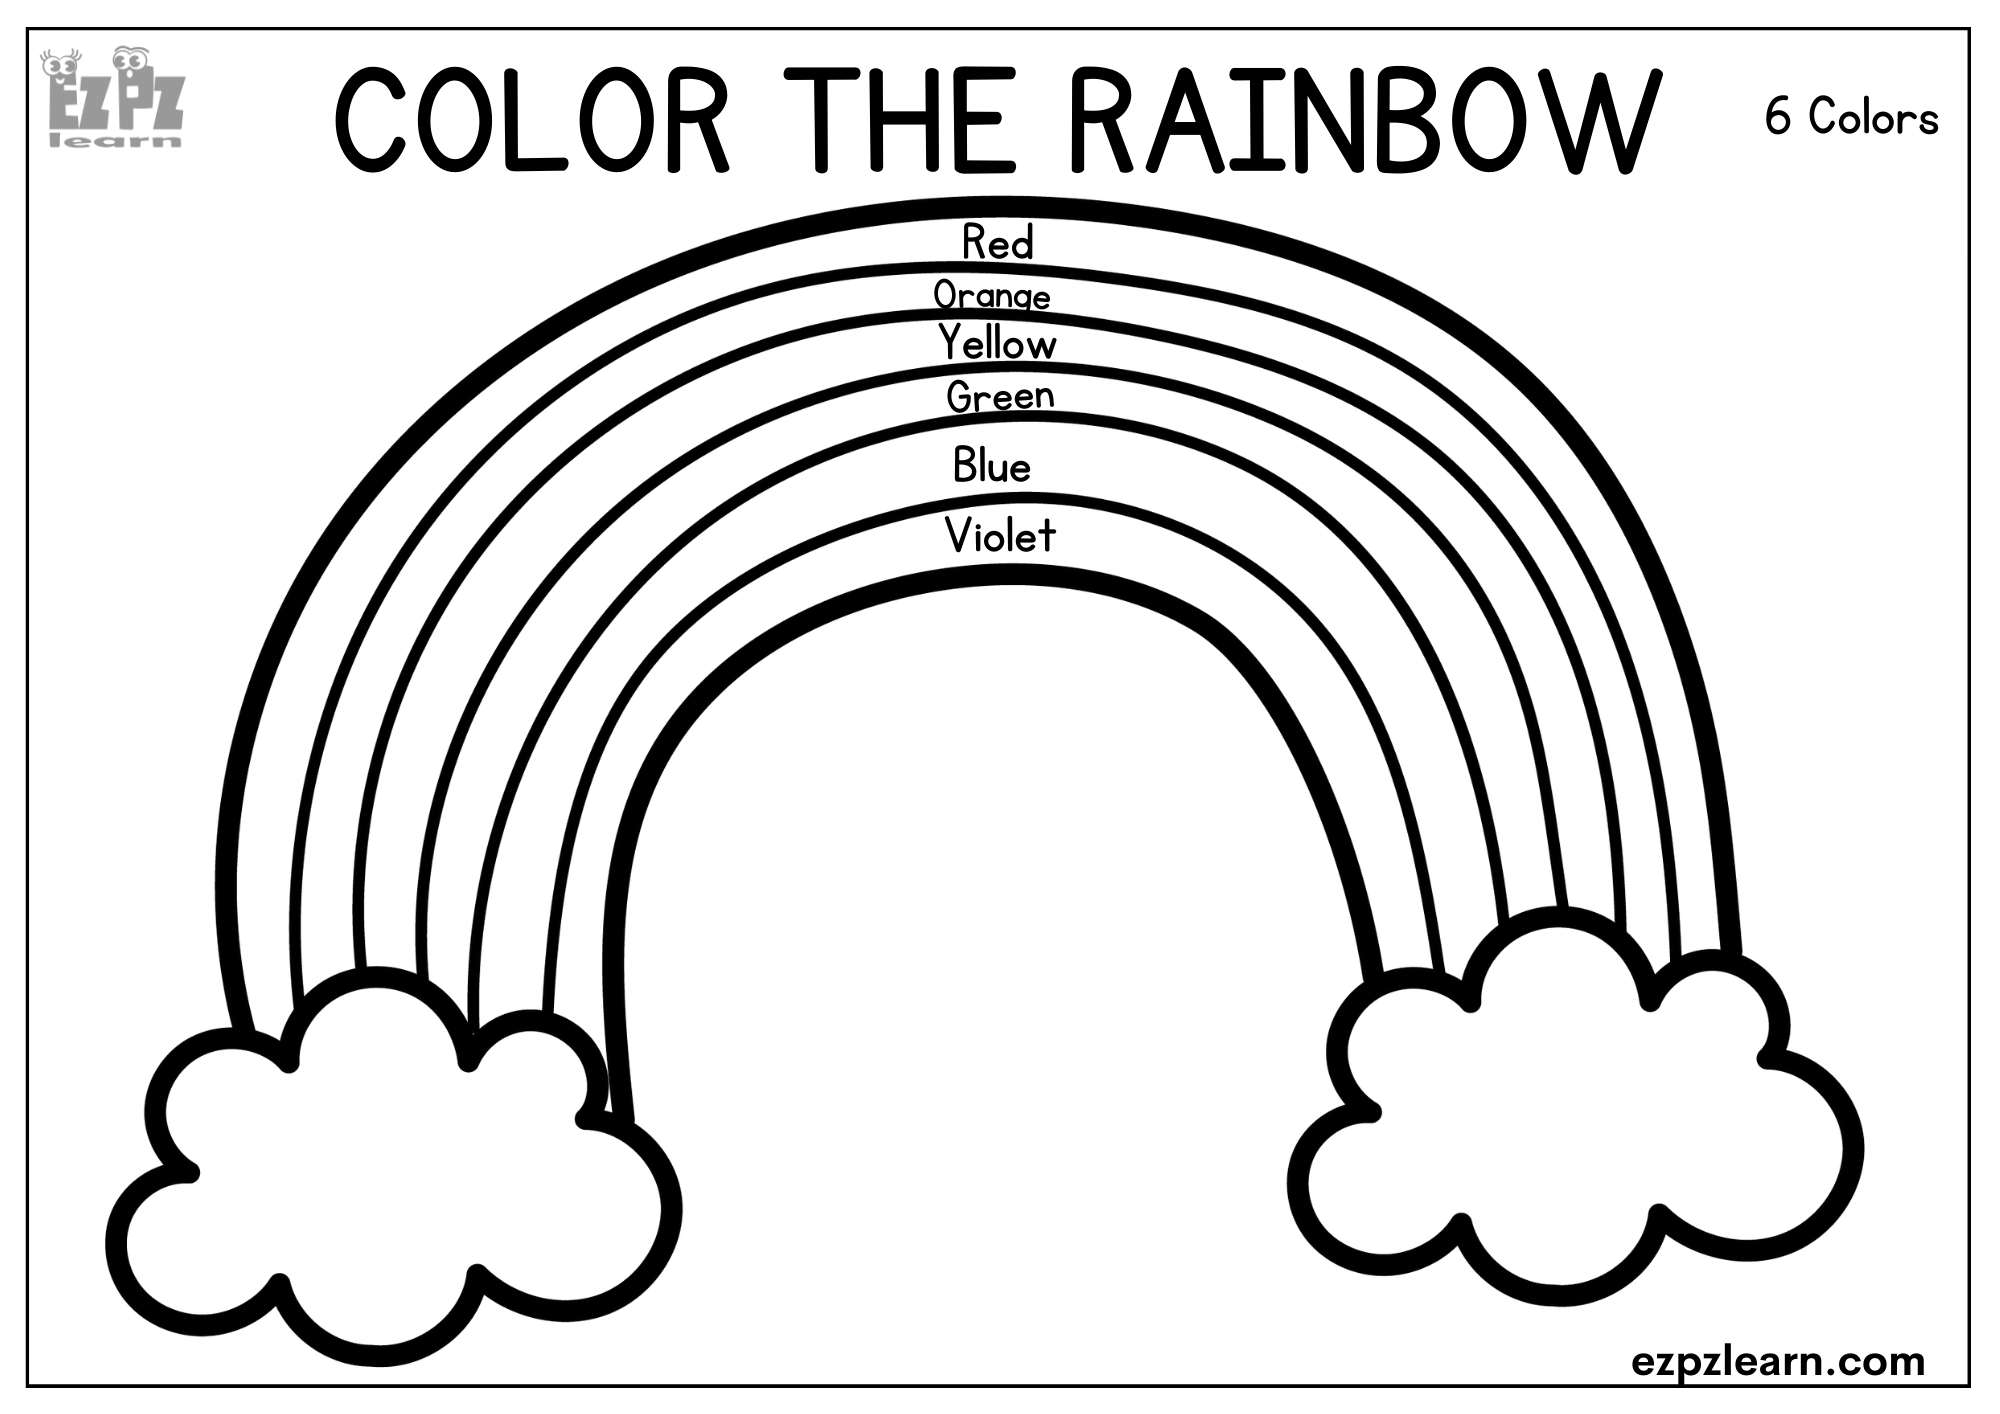 Images Green Rainbow Friends Coloring Pages - Free Printable Coloring Pages